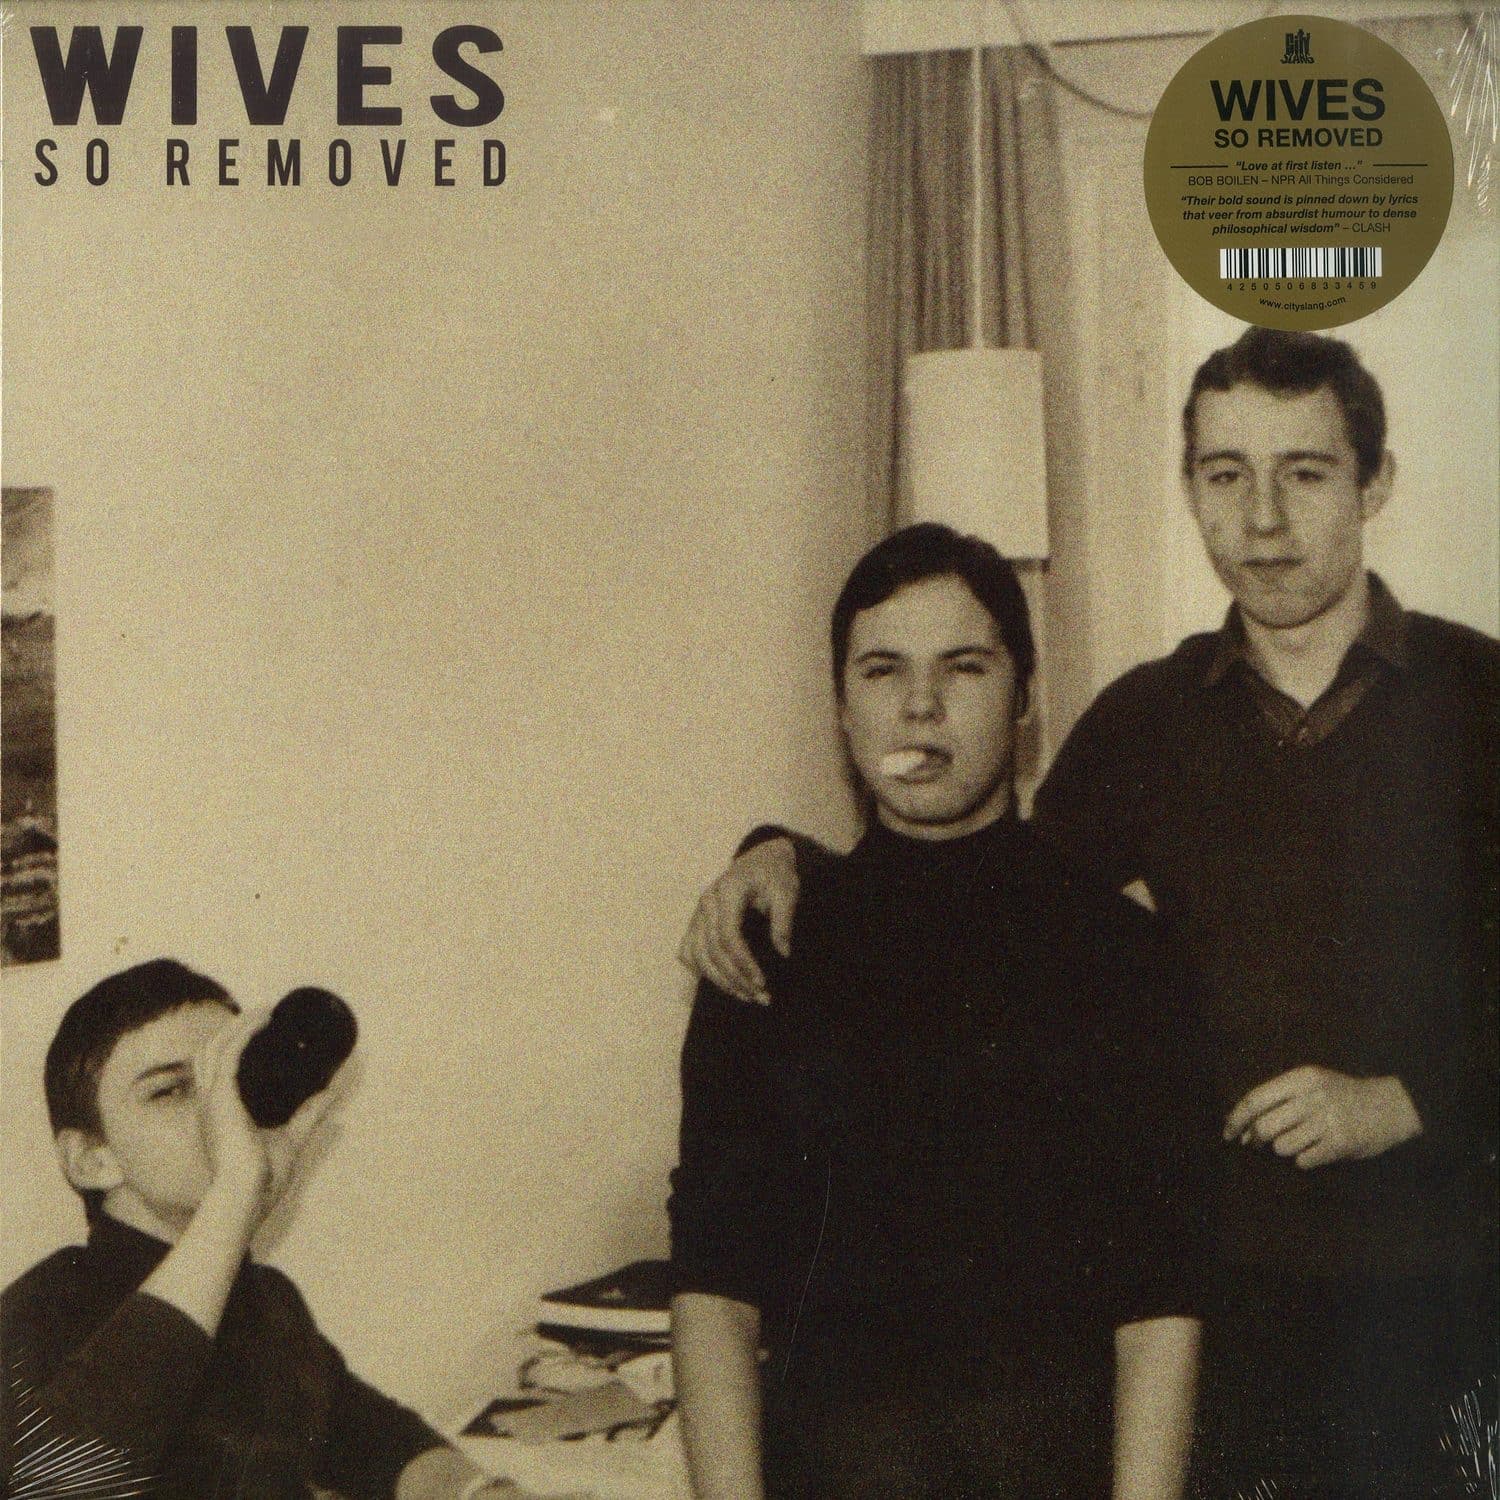 Wives - SO REMOVED 